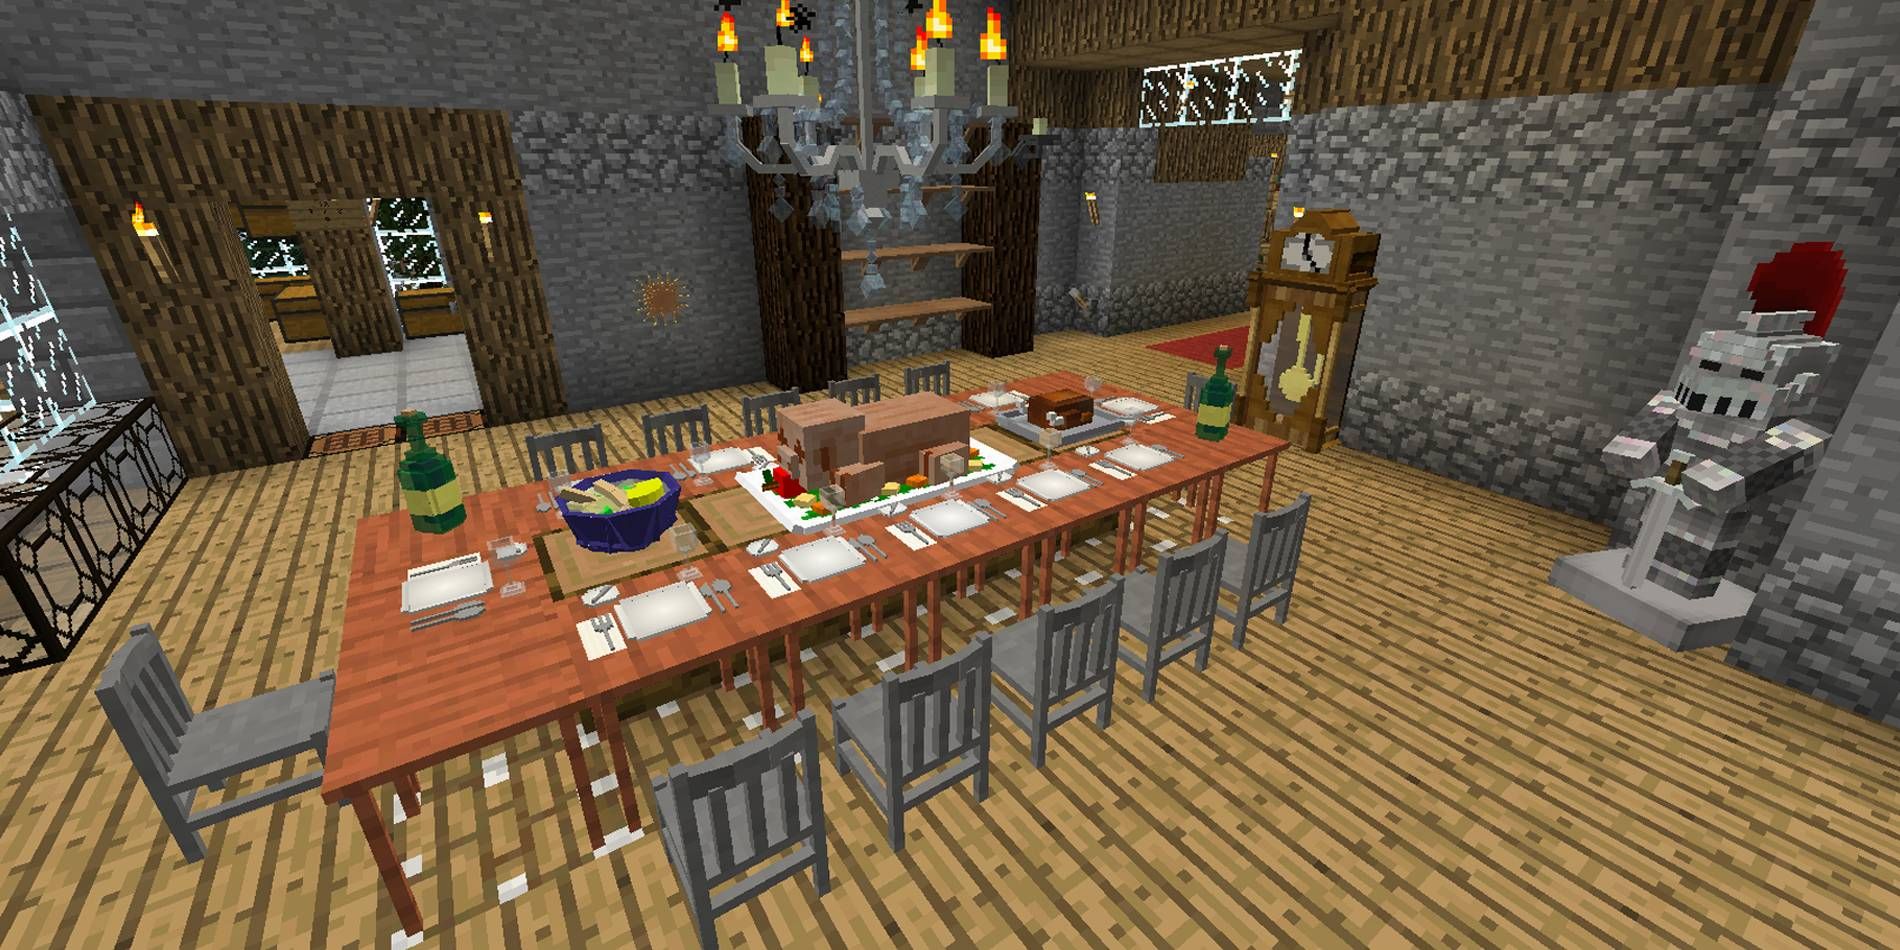 Minecraft Decocraft Mod with Thousands of Added Items for Extra Building Customization Including Tables, Chairs, Silverware, Statues, Etc